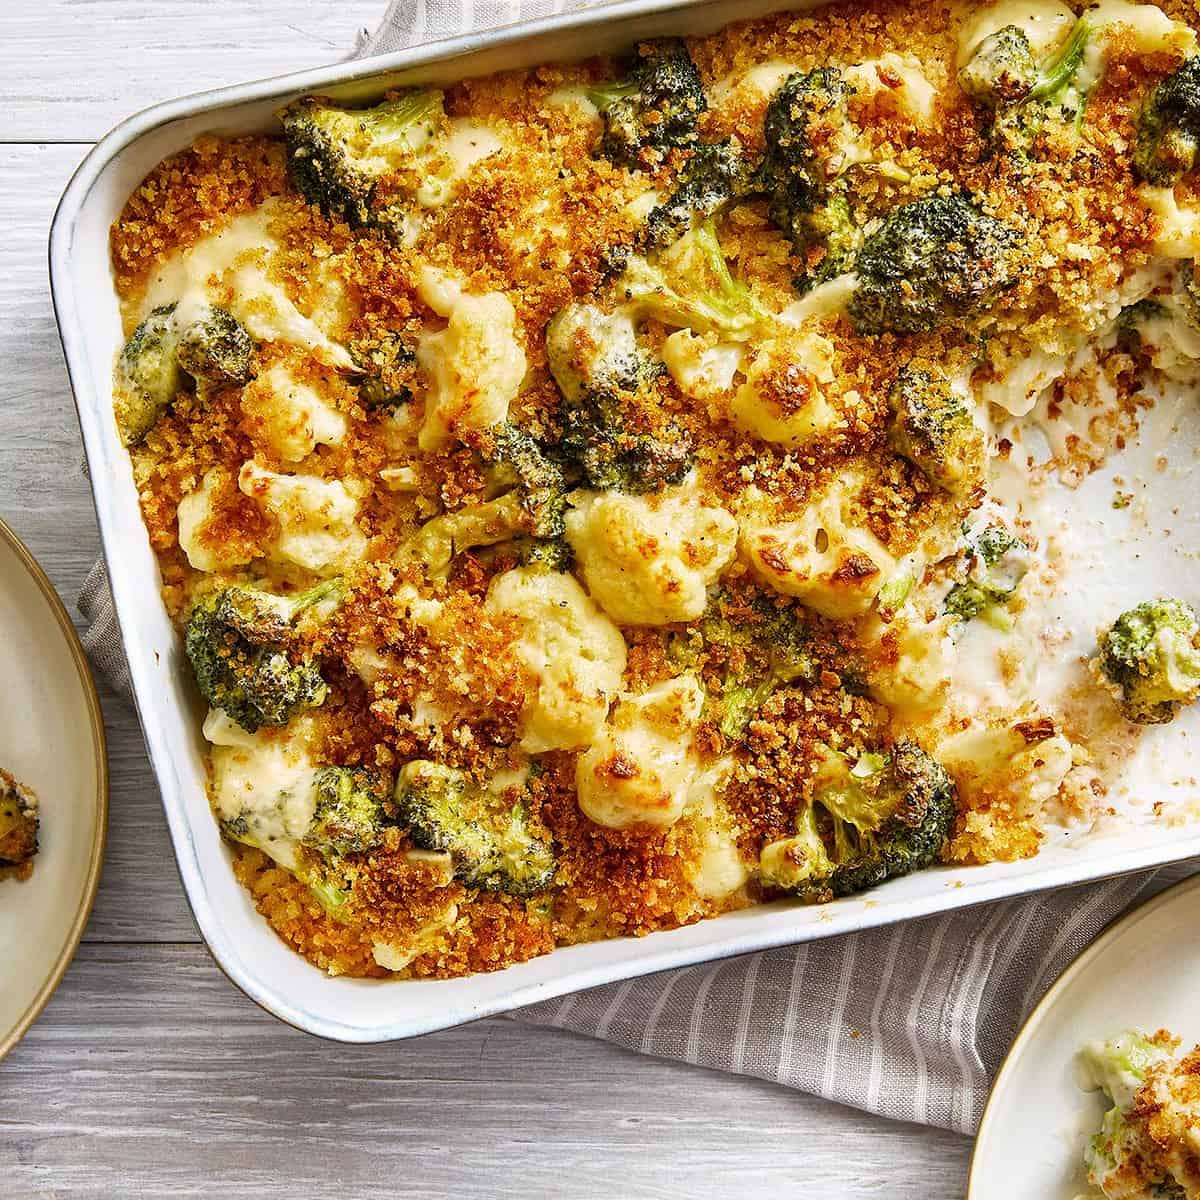  A cheesy and deliciously colorful broccoli and cauliflower casserole perfect for the whole family.